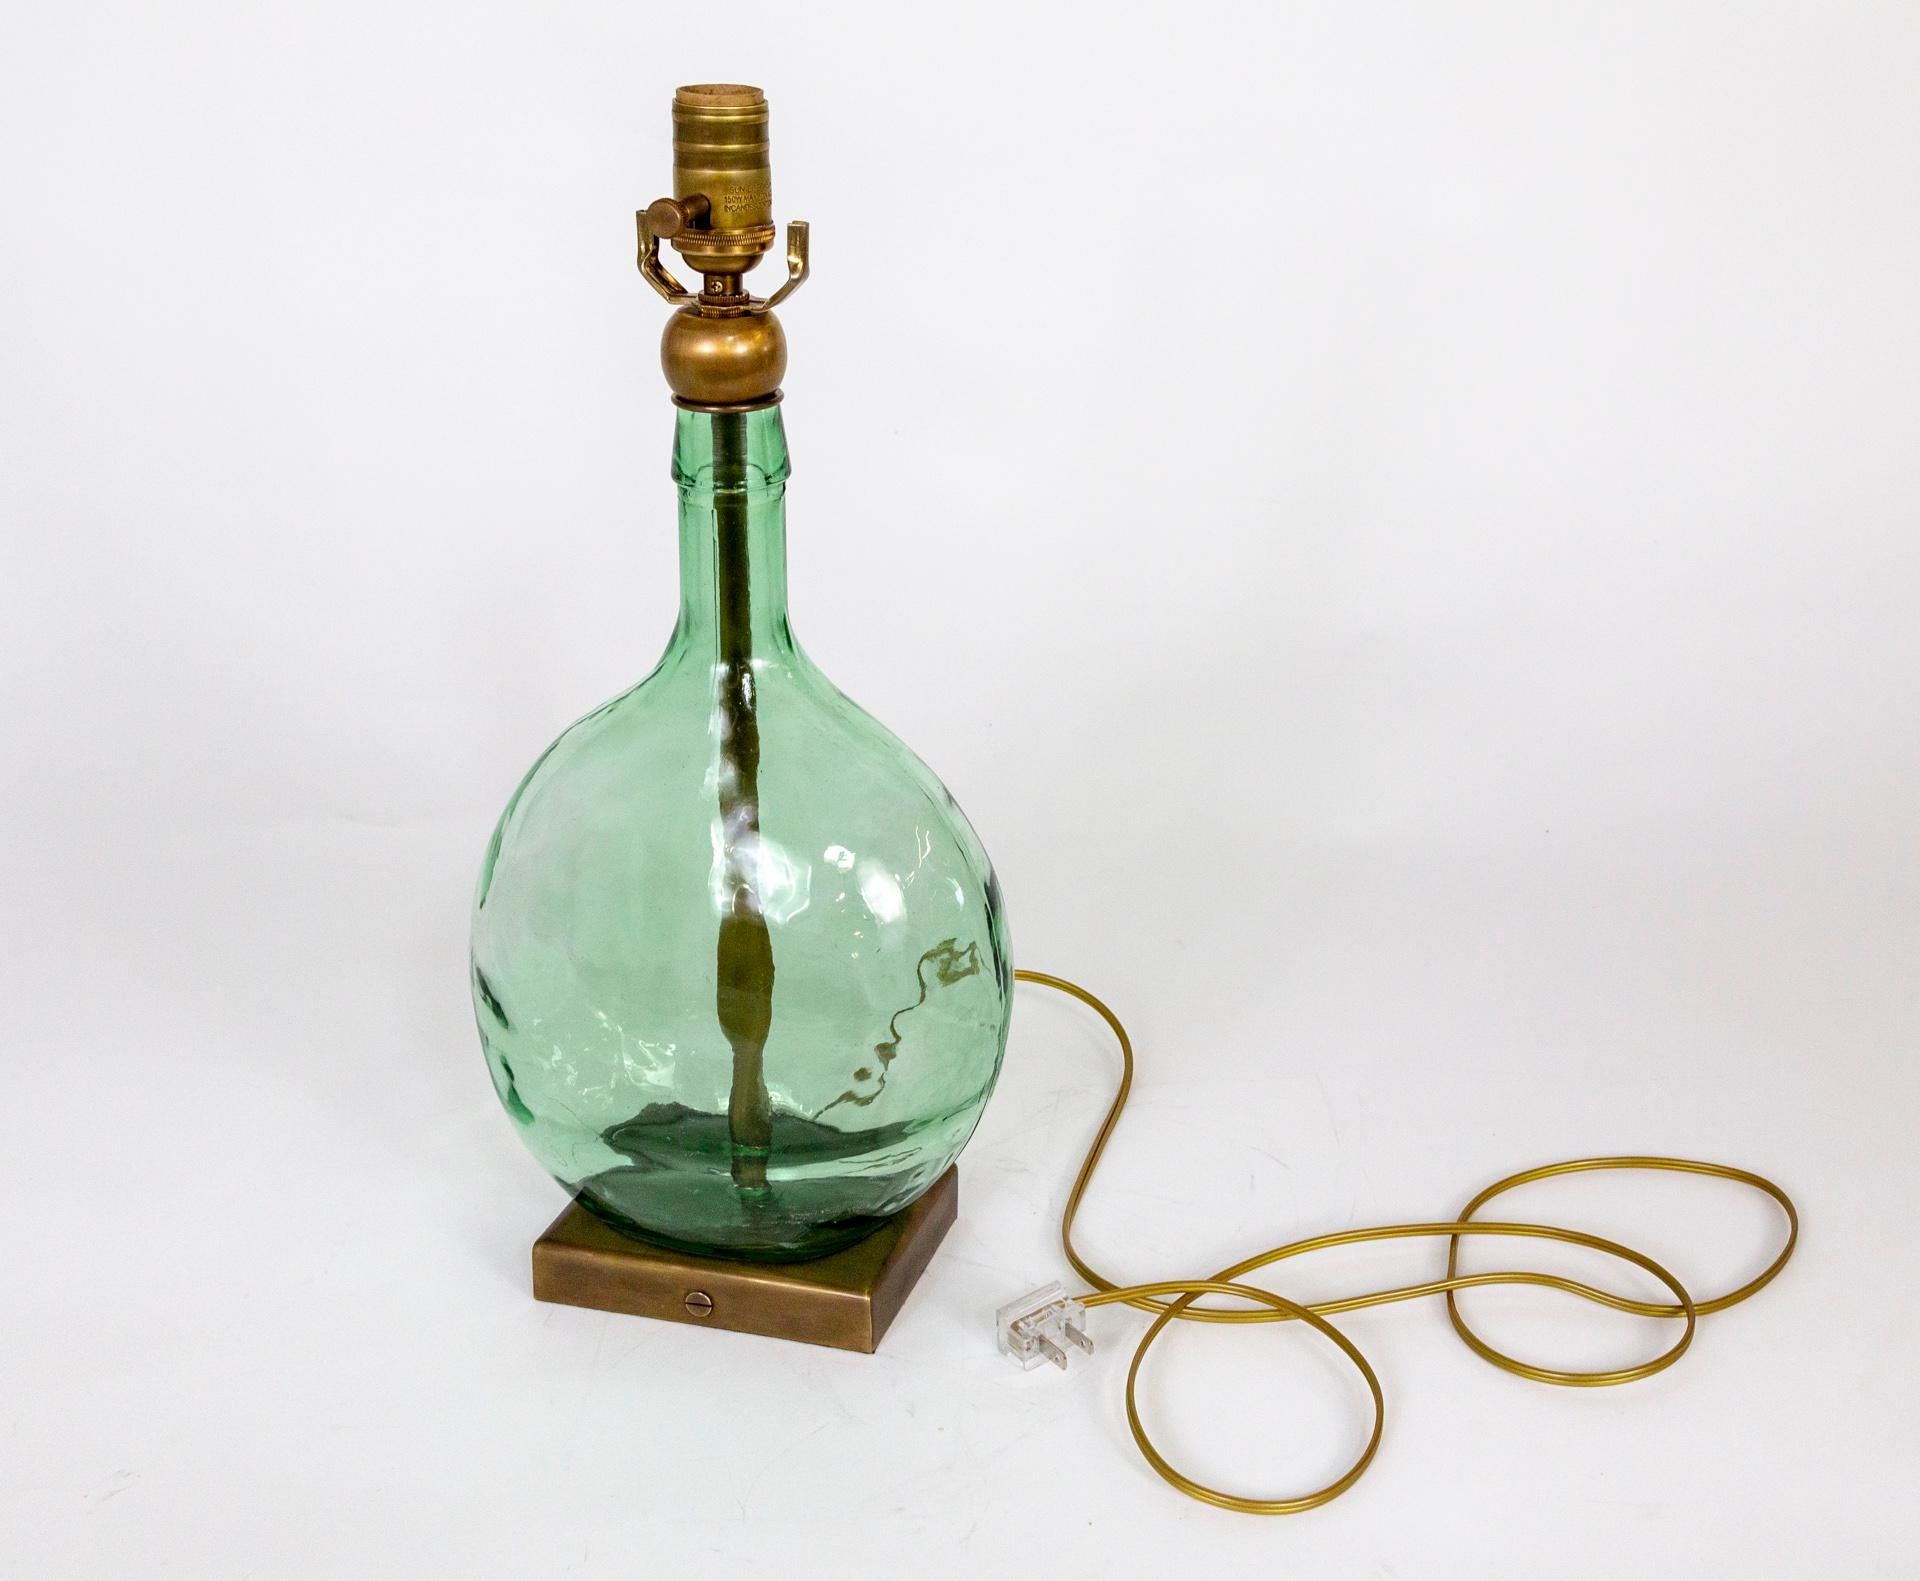 This is a large, translucent green, gourd-shaped bottle with a rippled effect on glass fashioned as a sleek lamp. It has slim depth and is mounted on a rectangular, brass base and capped with a brass ball. Newly wired with a dimmer on the socket.